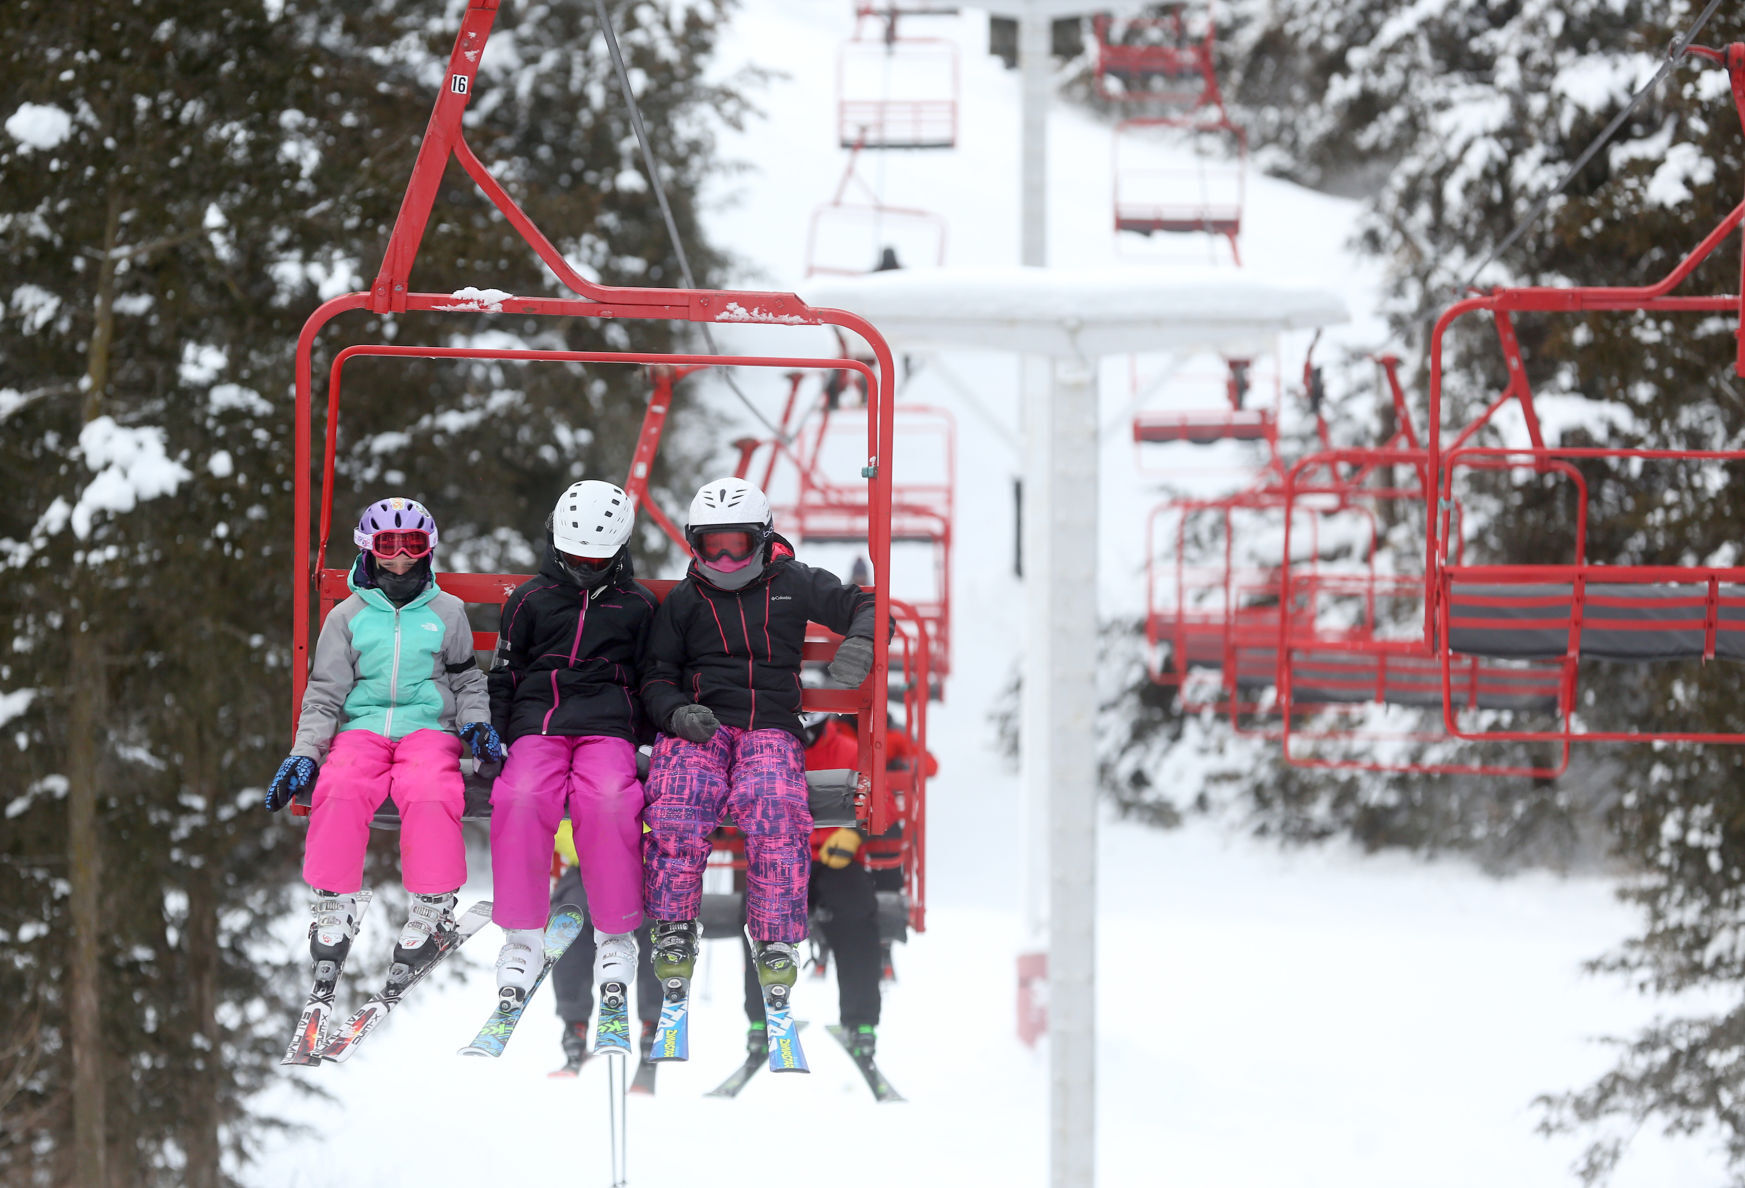 Skiers take a chair lift at Sundown Mountain Resort in rural Dubuque on Sunday, Feb. 7, 2021. PHOTO CREDIT: JESSICA REILLY